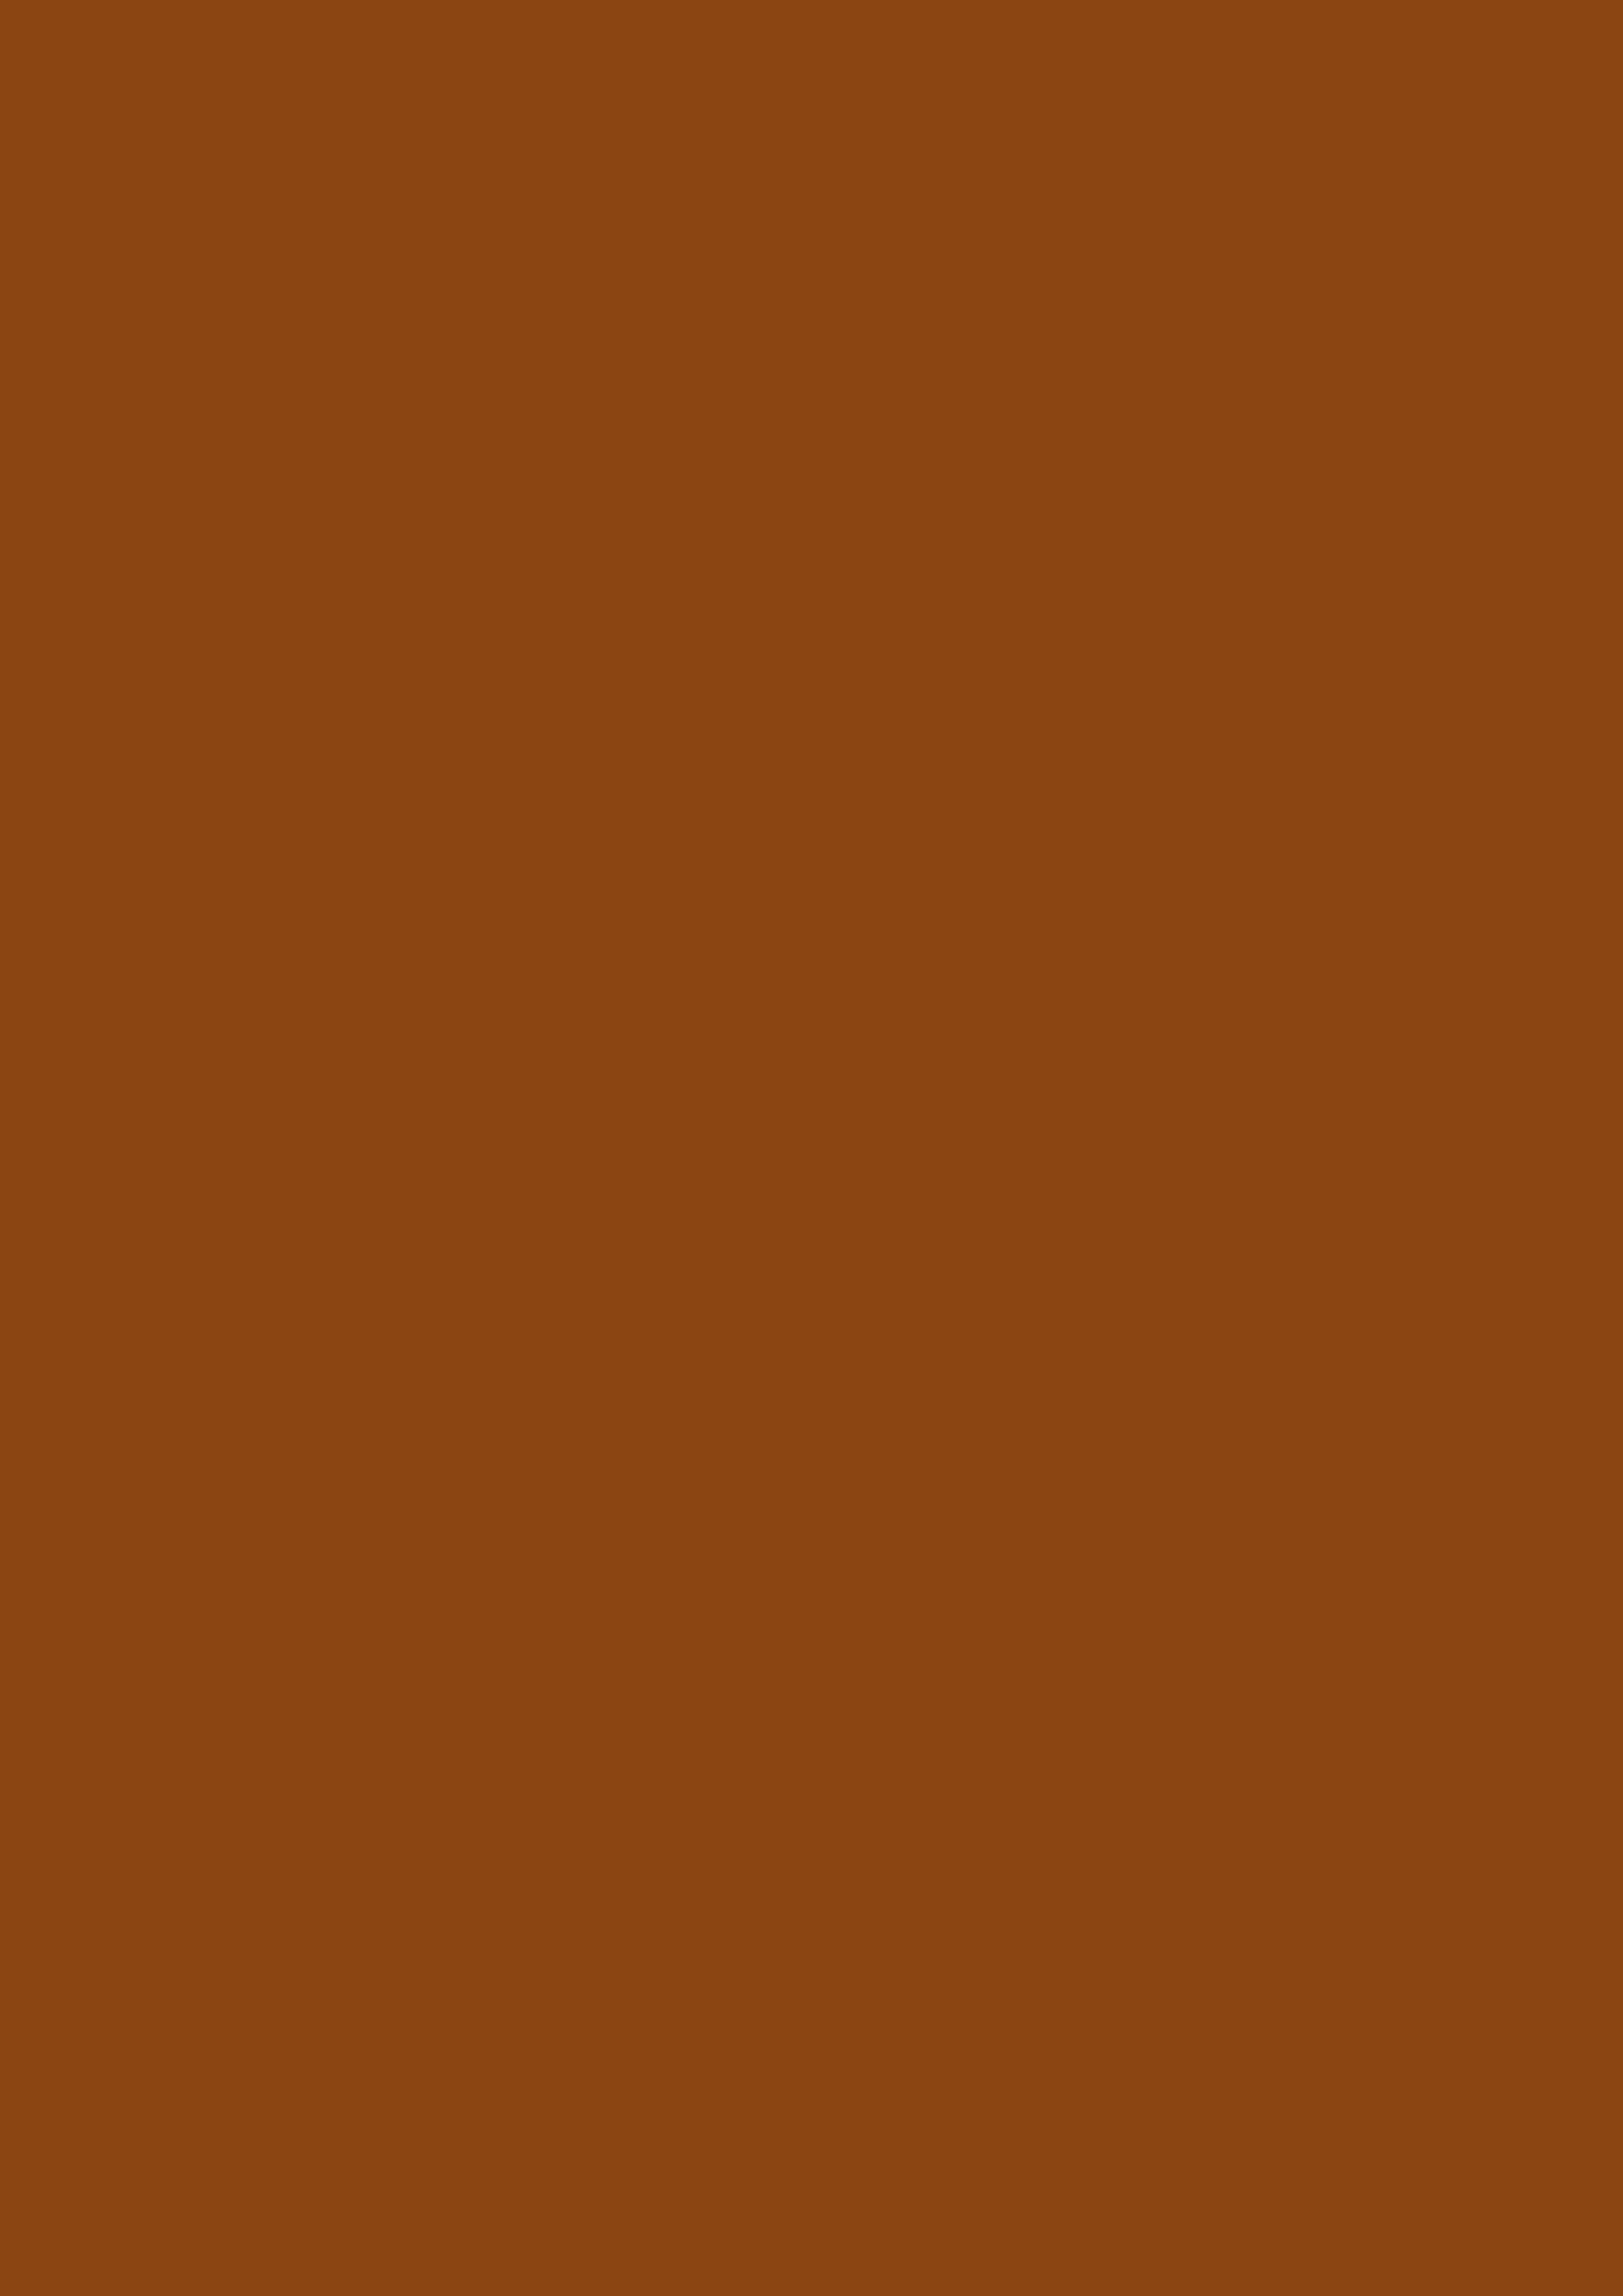 2480x3508 Saddle Brown Solid Color Background